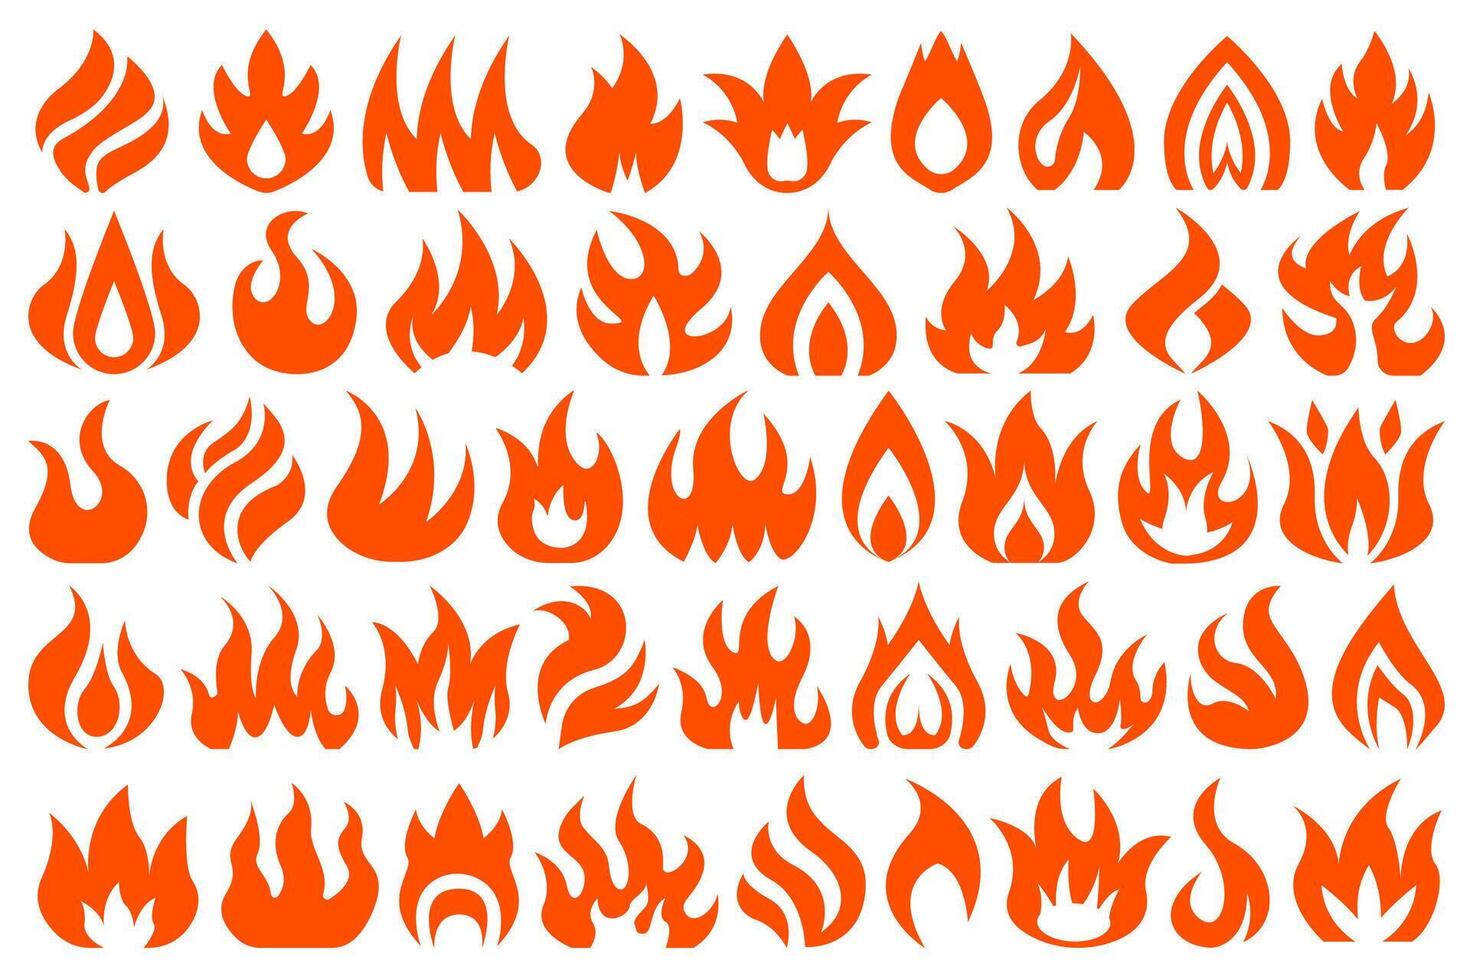 Hot burning red orange fire set. Collection of flat flaming fire design elements. Flame illustration set for logo, icon, design element for your projects. vector